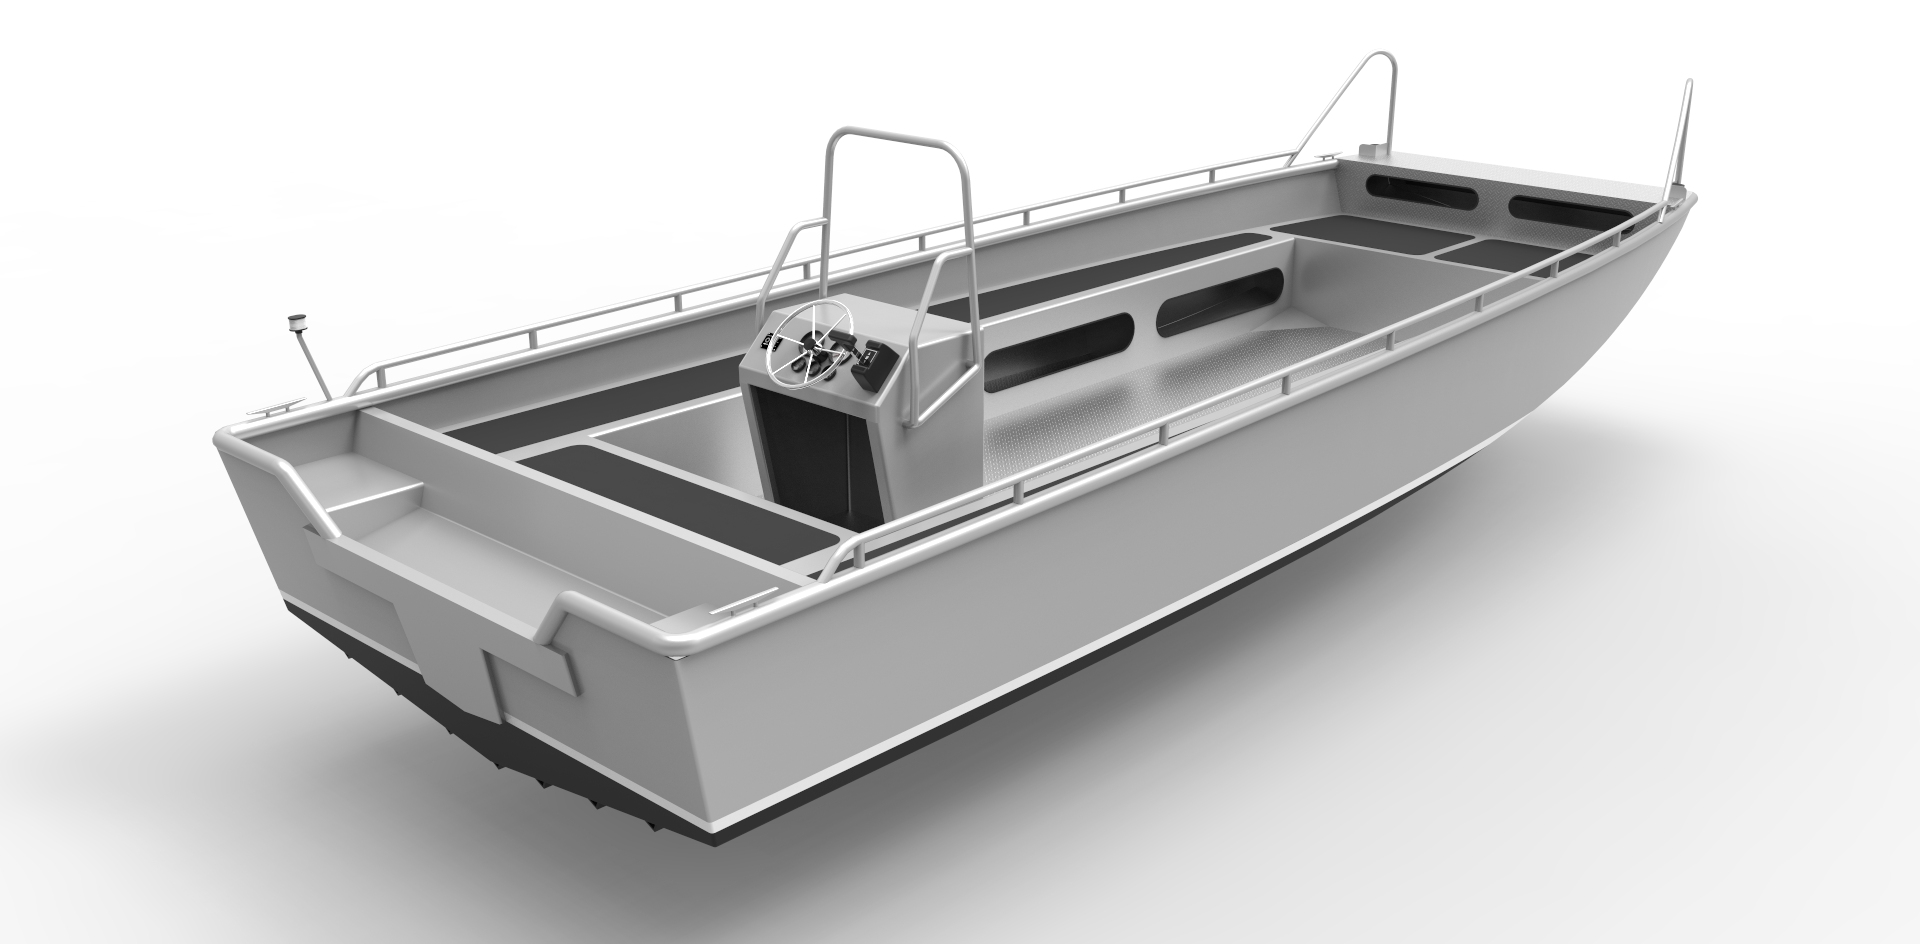 Building a 16 Foot Aluminum Fishing Boat From a Kit - YouTube. 